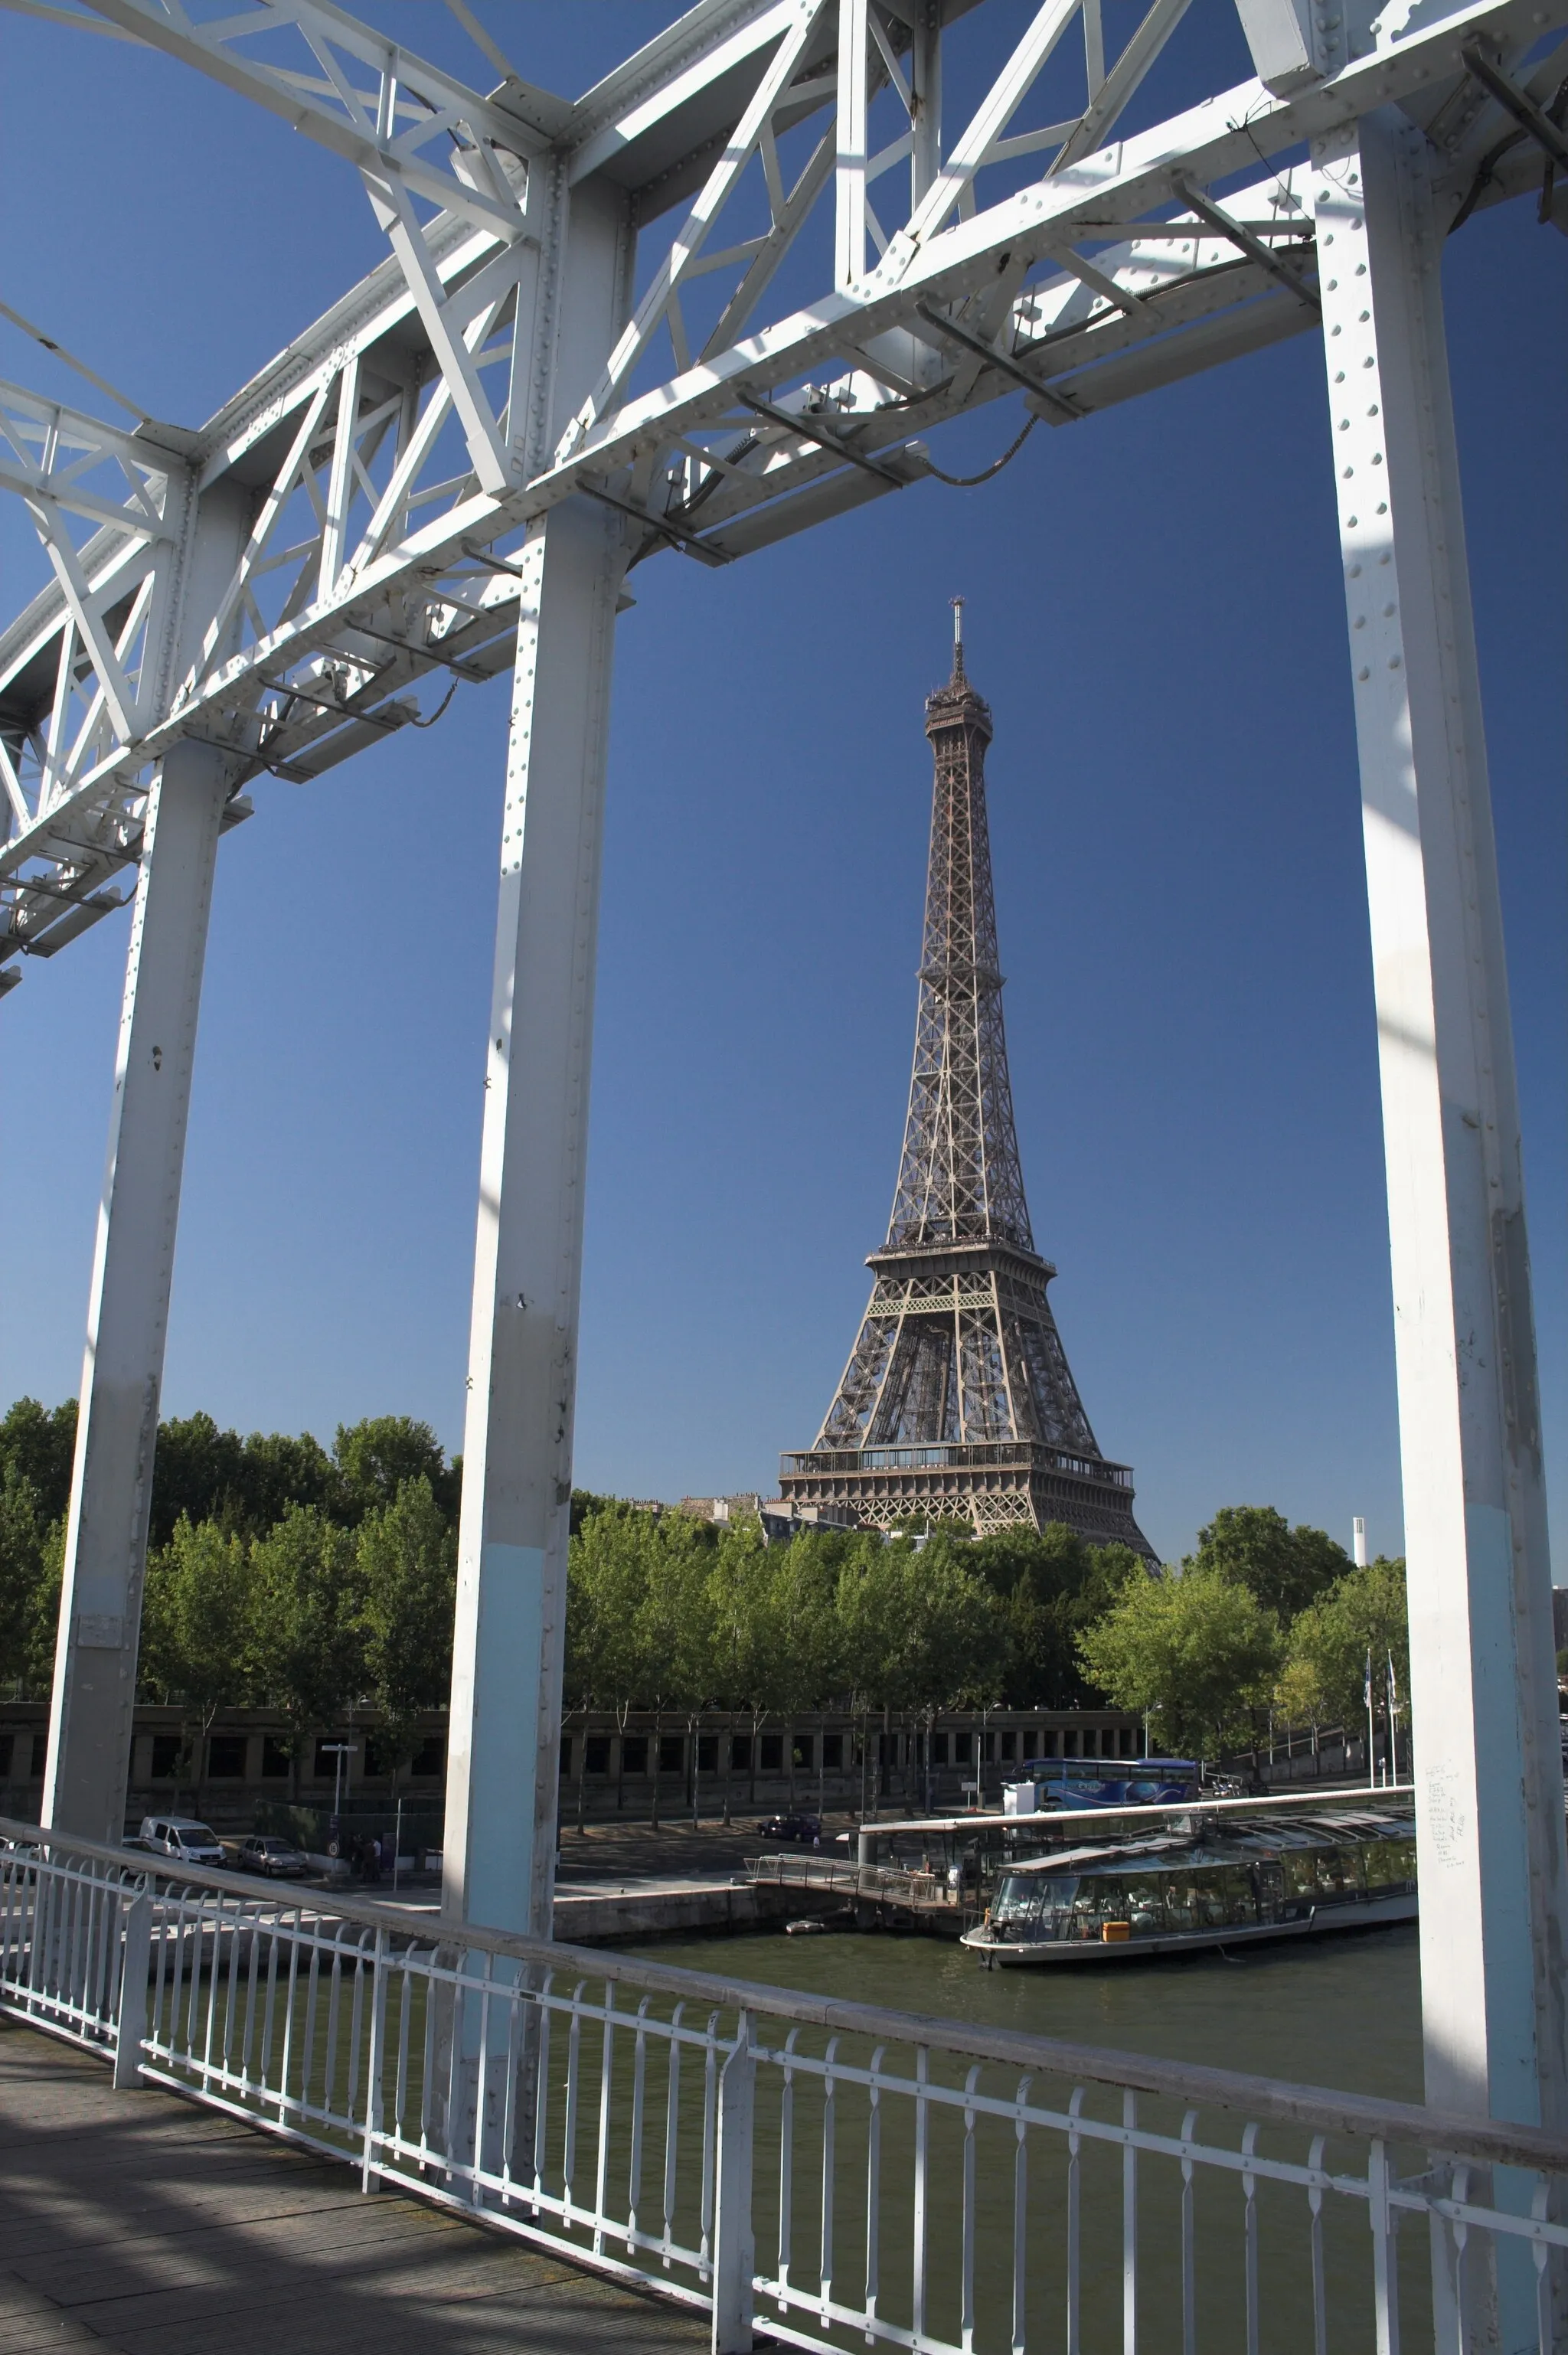 Photo showing: The view of Eiffel Tower, Paris, France, from the bridge Passerelle Debilly